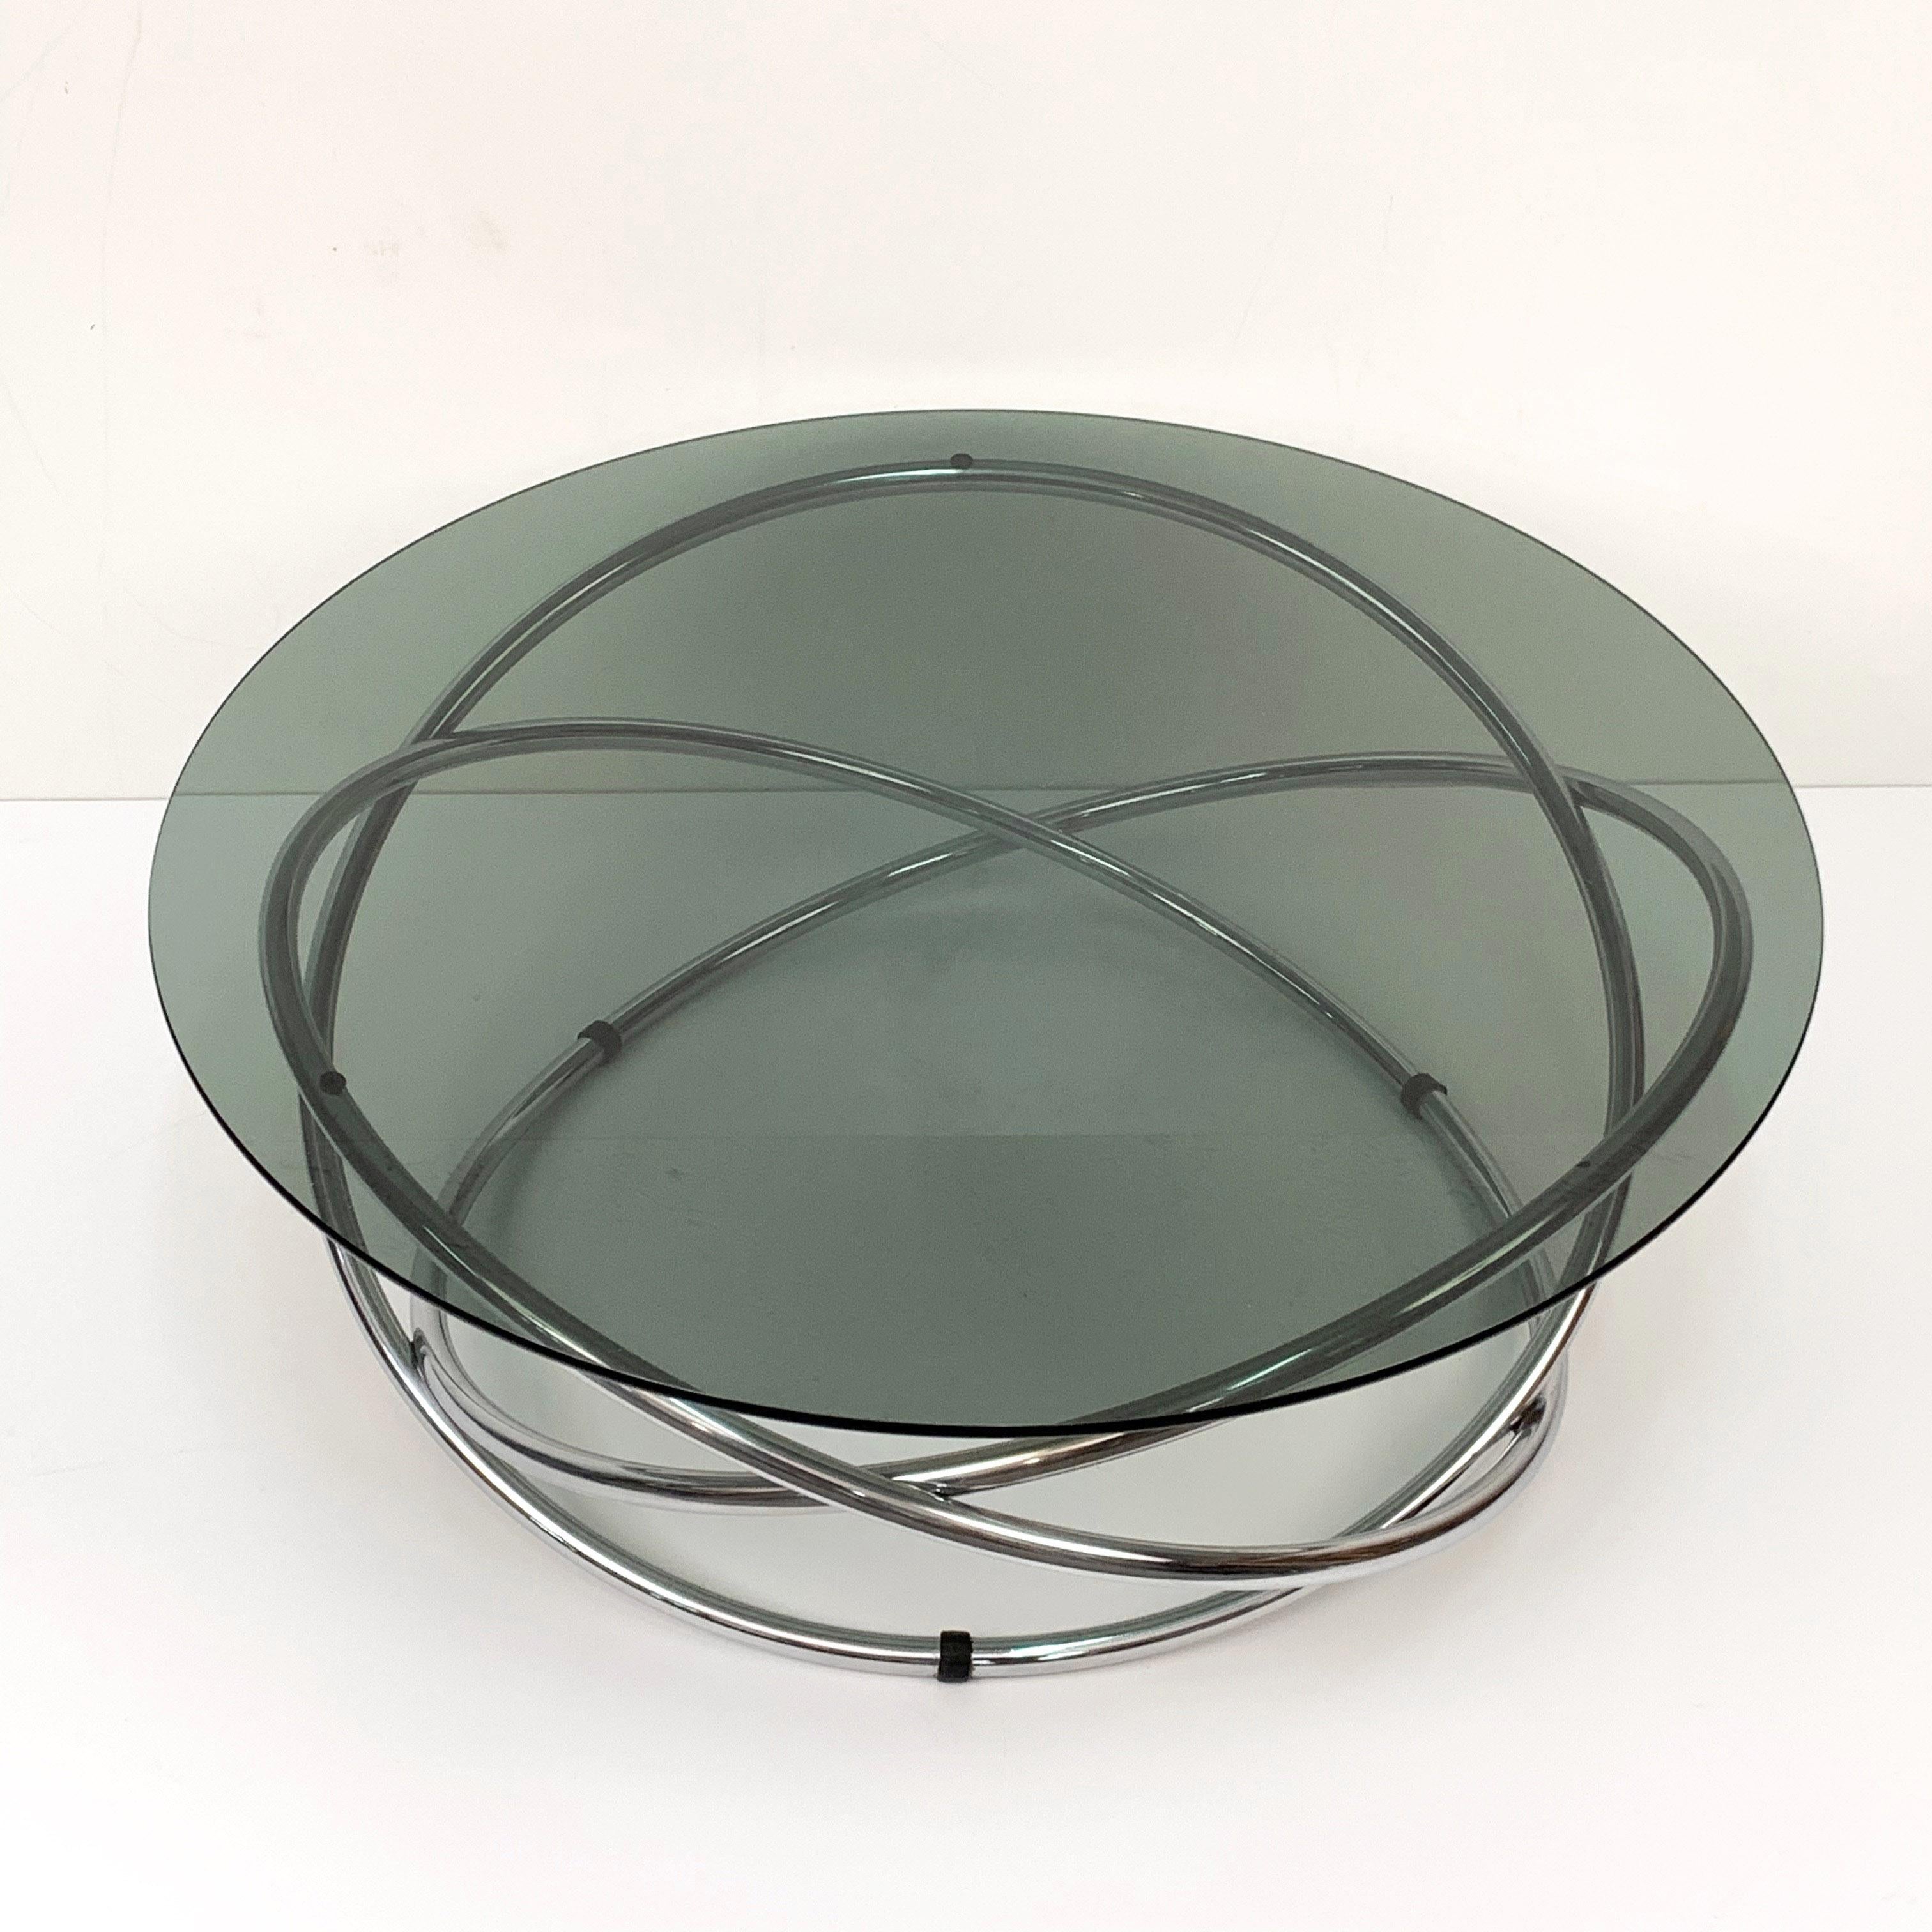 Beautiful round coffee table in chromed steel with smoked glass top made in Italy in the 1960s.

This atomic style Italian coffee table features a base with three tubular metal rings, and a smoked glass top.

A perfect example of 1960s design